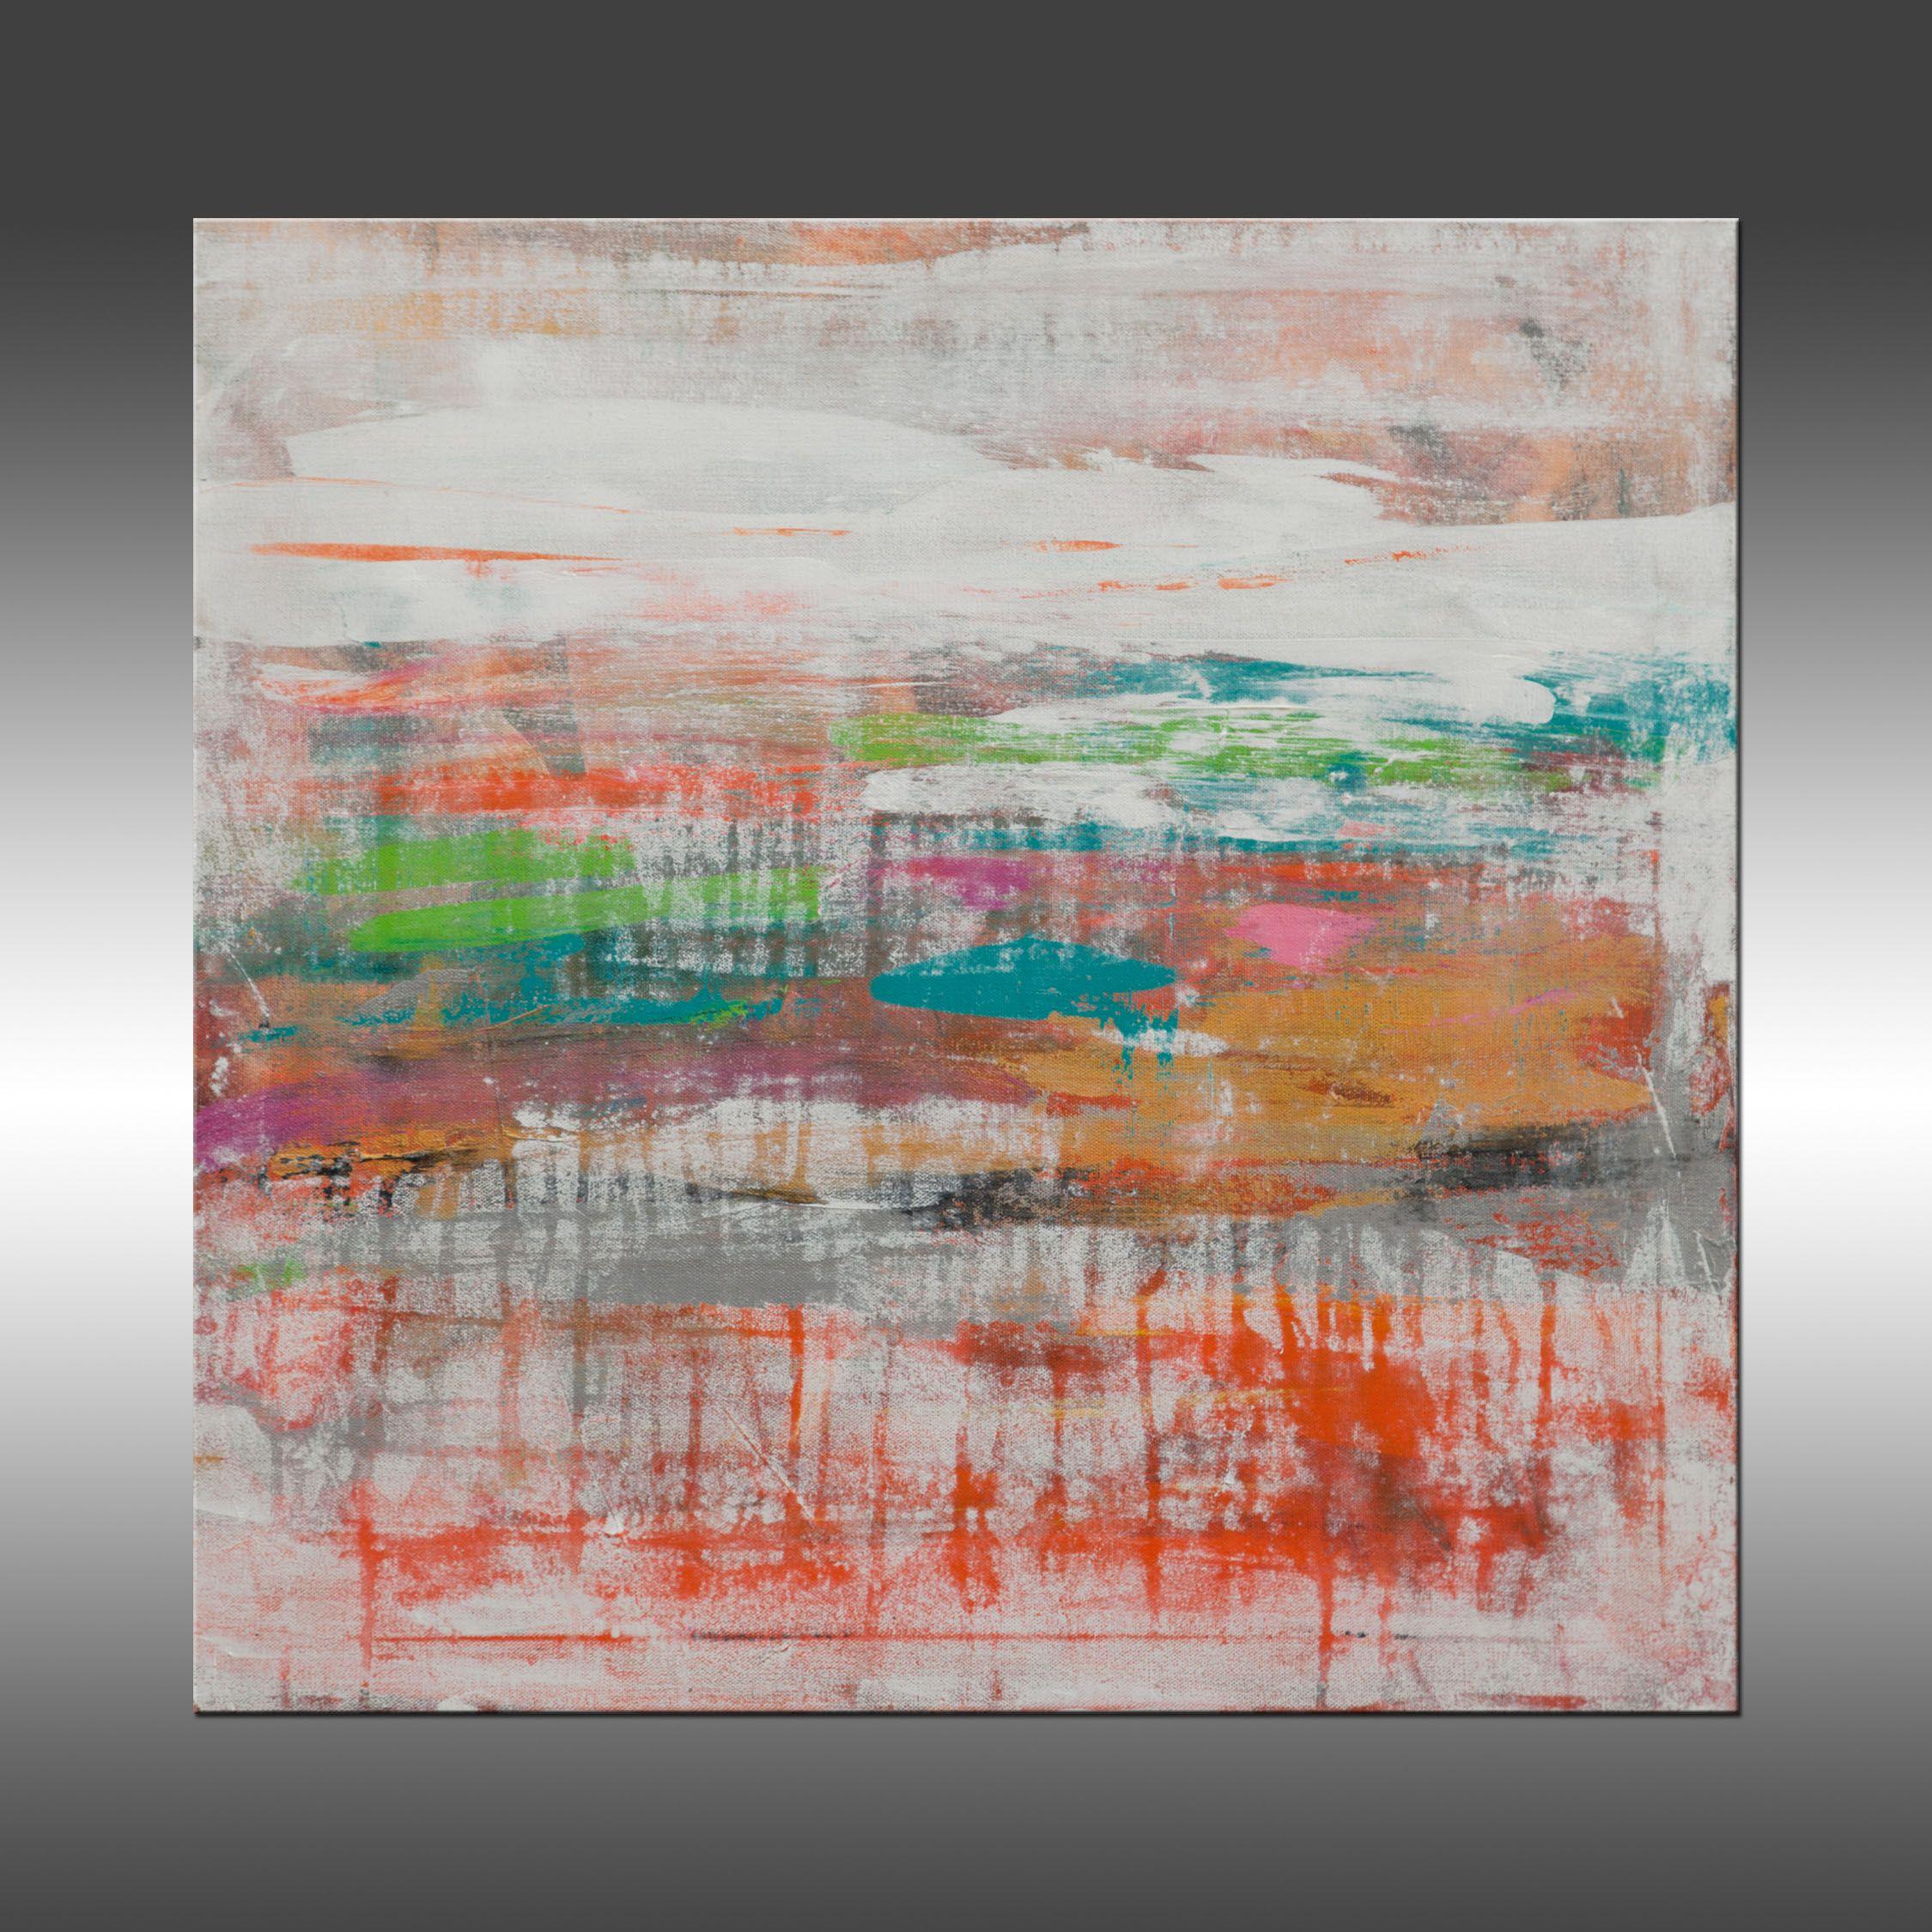 Lithosphere 189 is an original painting, created with acrylic paint on gallery-wrapped canvas. It has a width of 24 inches and a height of 24 inches with a depth of 1.5 inches (24x24x1.5).    The colors used in the painting are orange, white, pink,